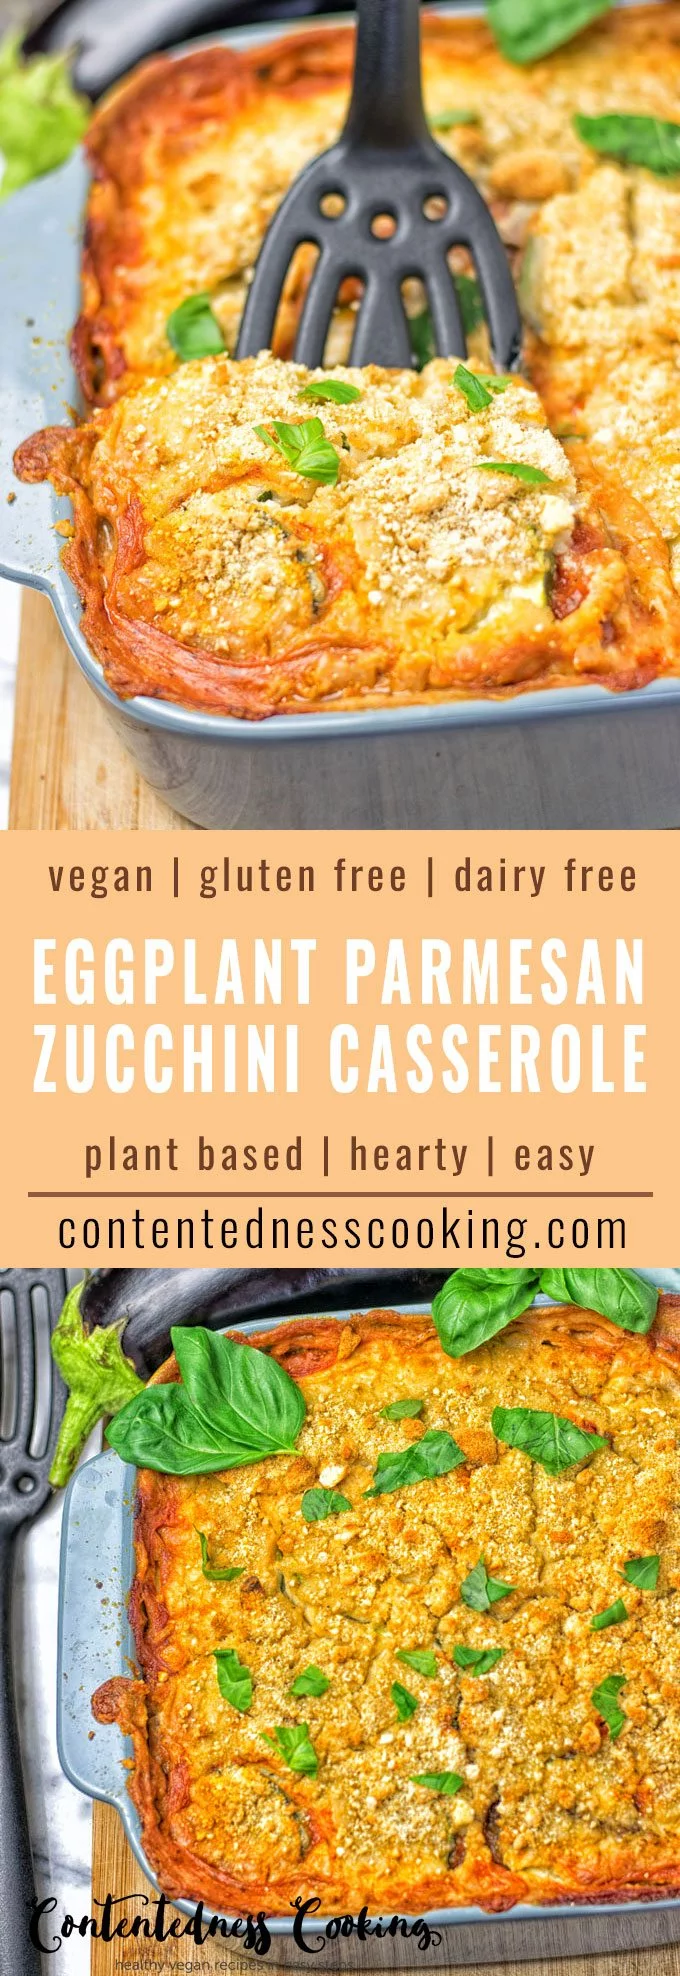 Collage of two pictures of the Eggplant Parmesan Zucchini Casserole with recipe title text.